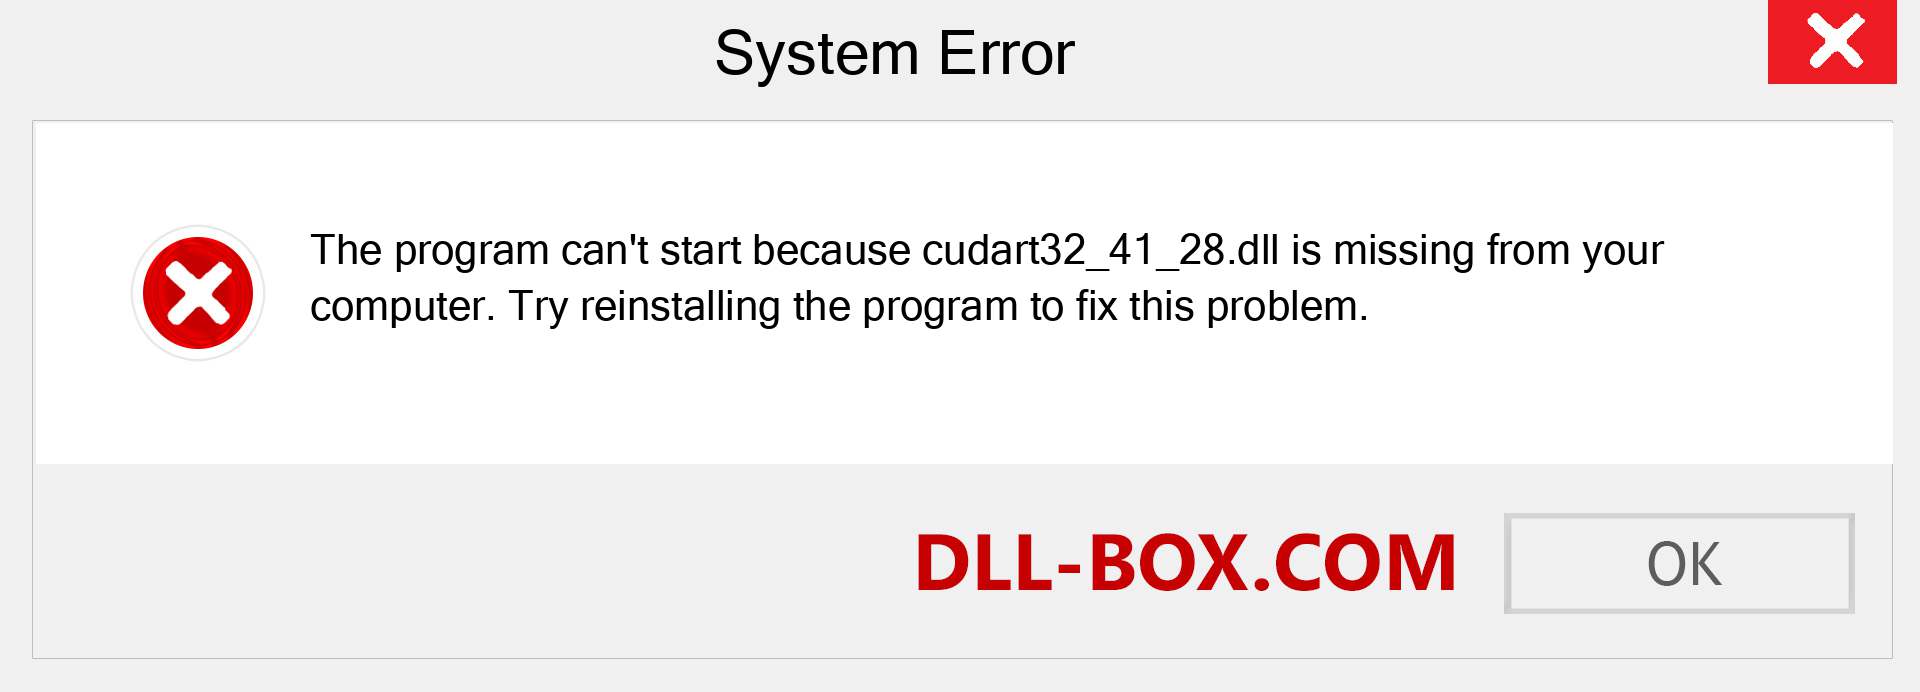  cudart32_41_28.dll file is missing?. Download for Windows 7, 8, 10 - Fix  cudart32_41_28 dll Missing Error on Windows, photos, images